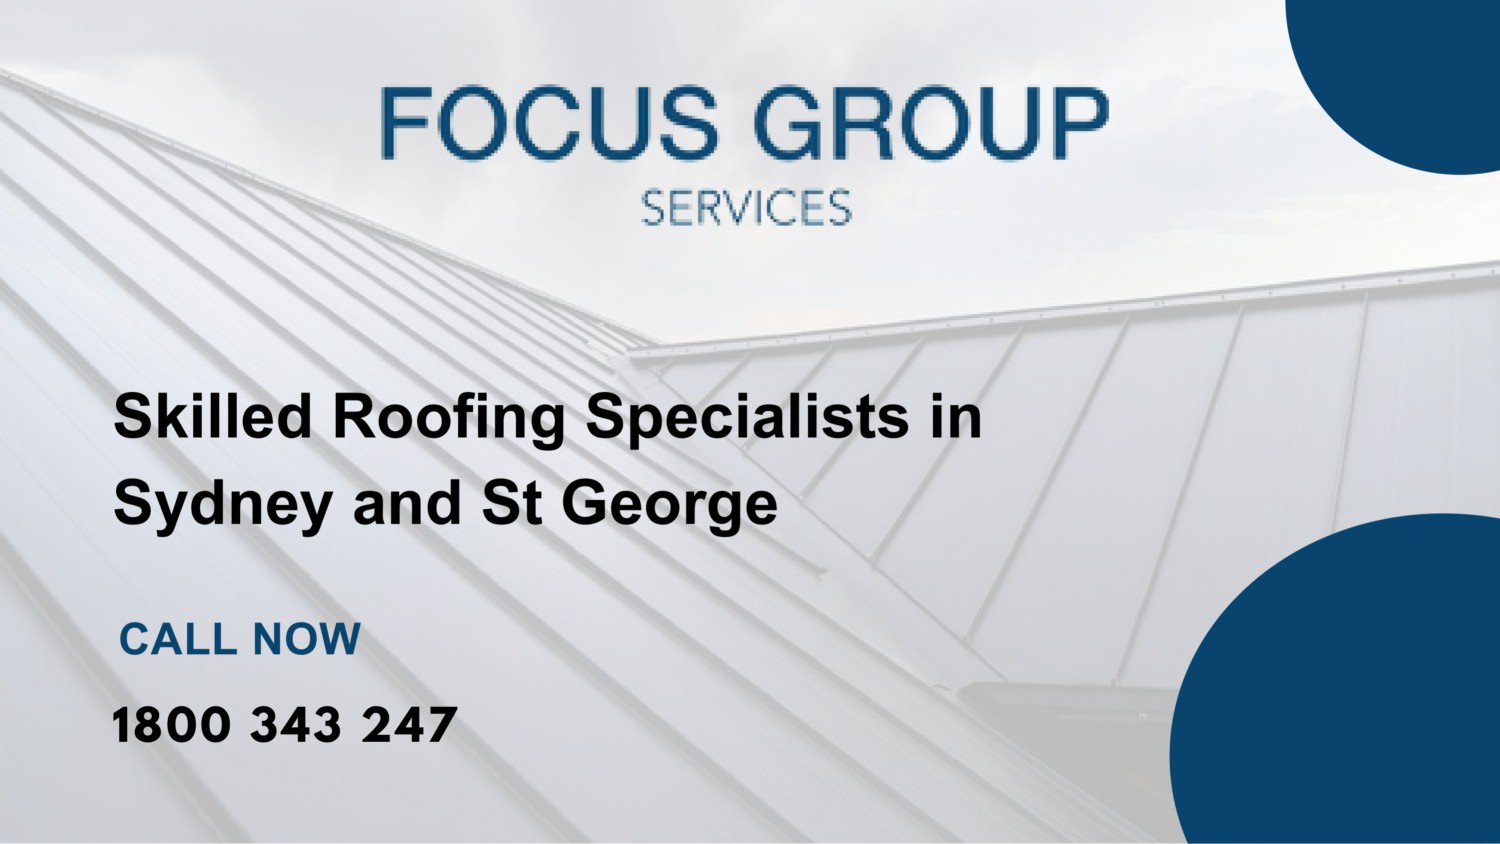 Skilled Roofing Specialists in Sydney and St George